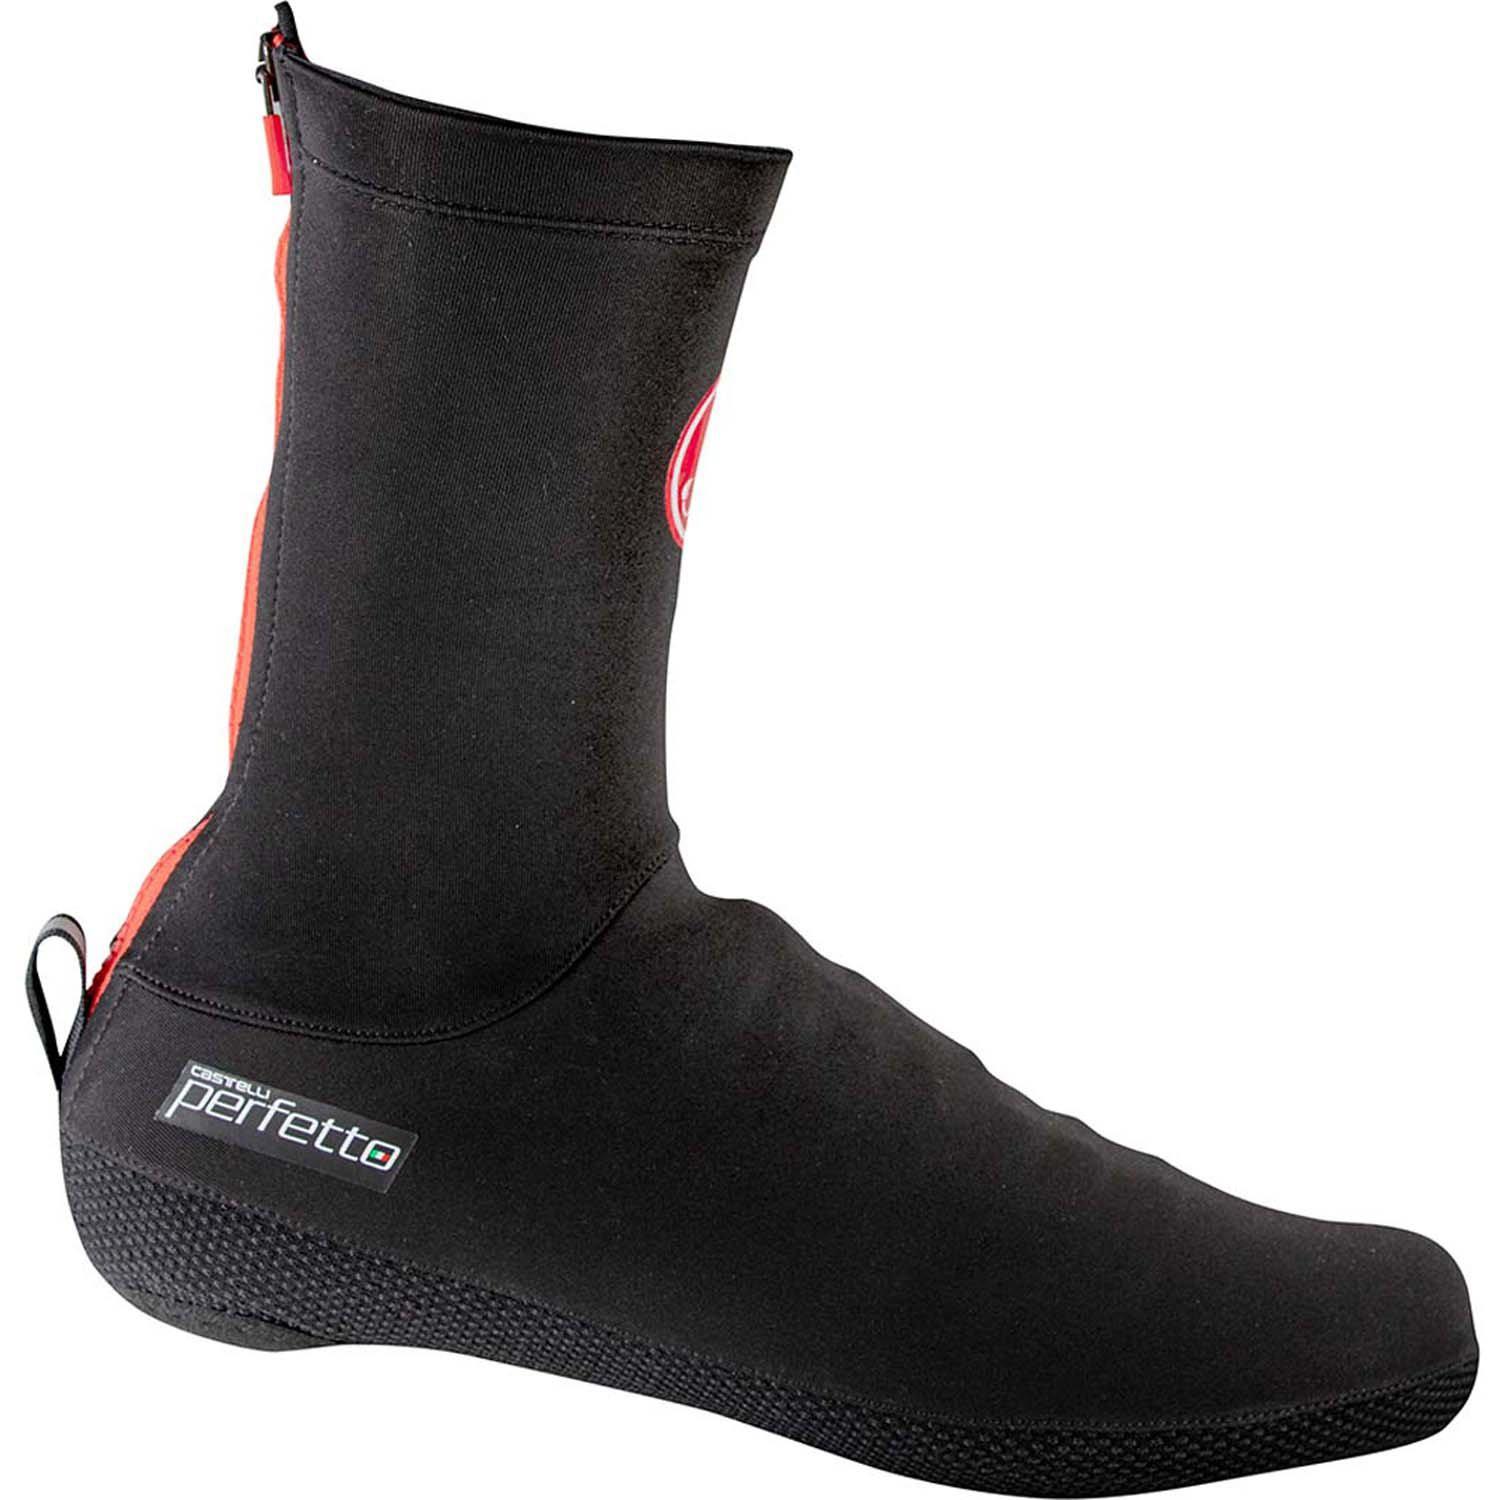 Castelli Perfetto Shoe Covers - AW21 | Merlin Cycles